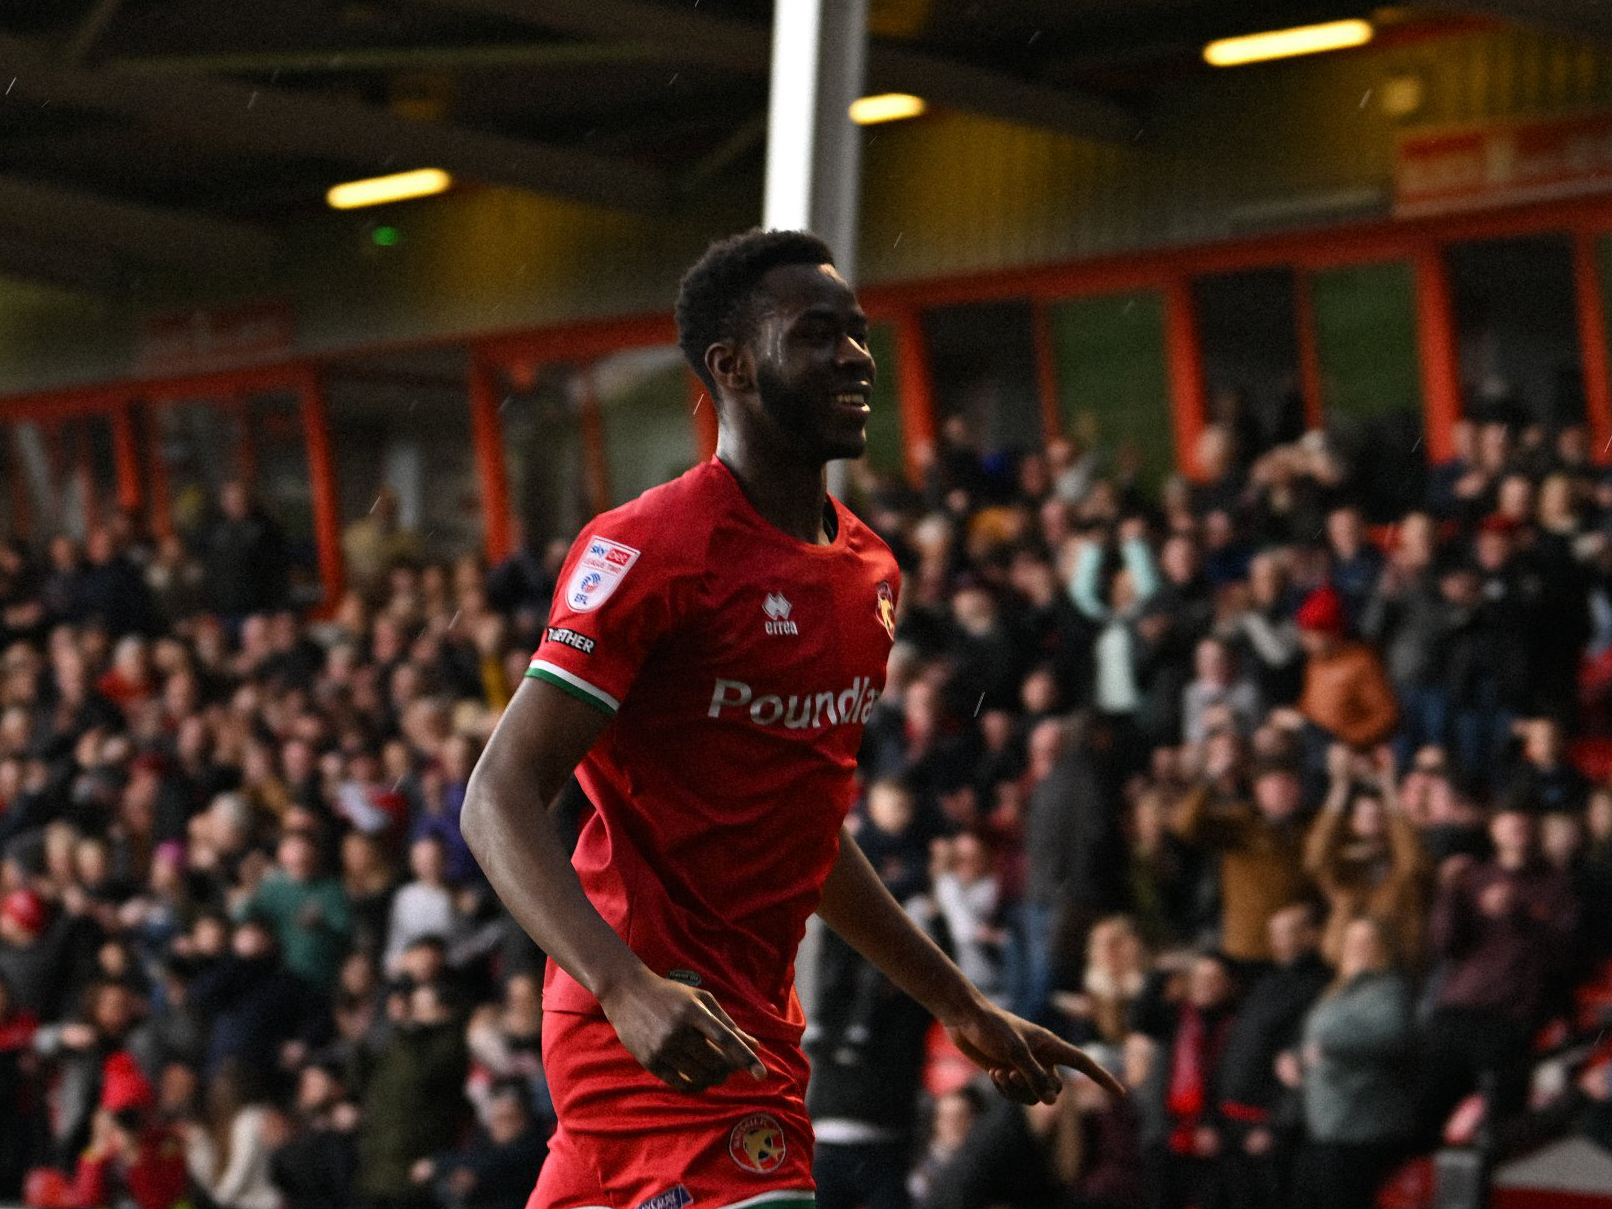 Mo Faal celebrates scoring for Walsall while wearing their home shirt 